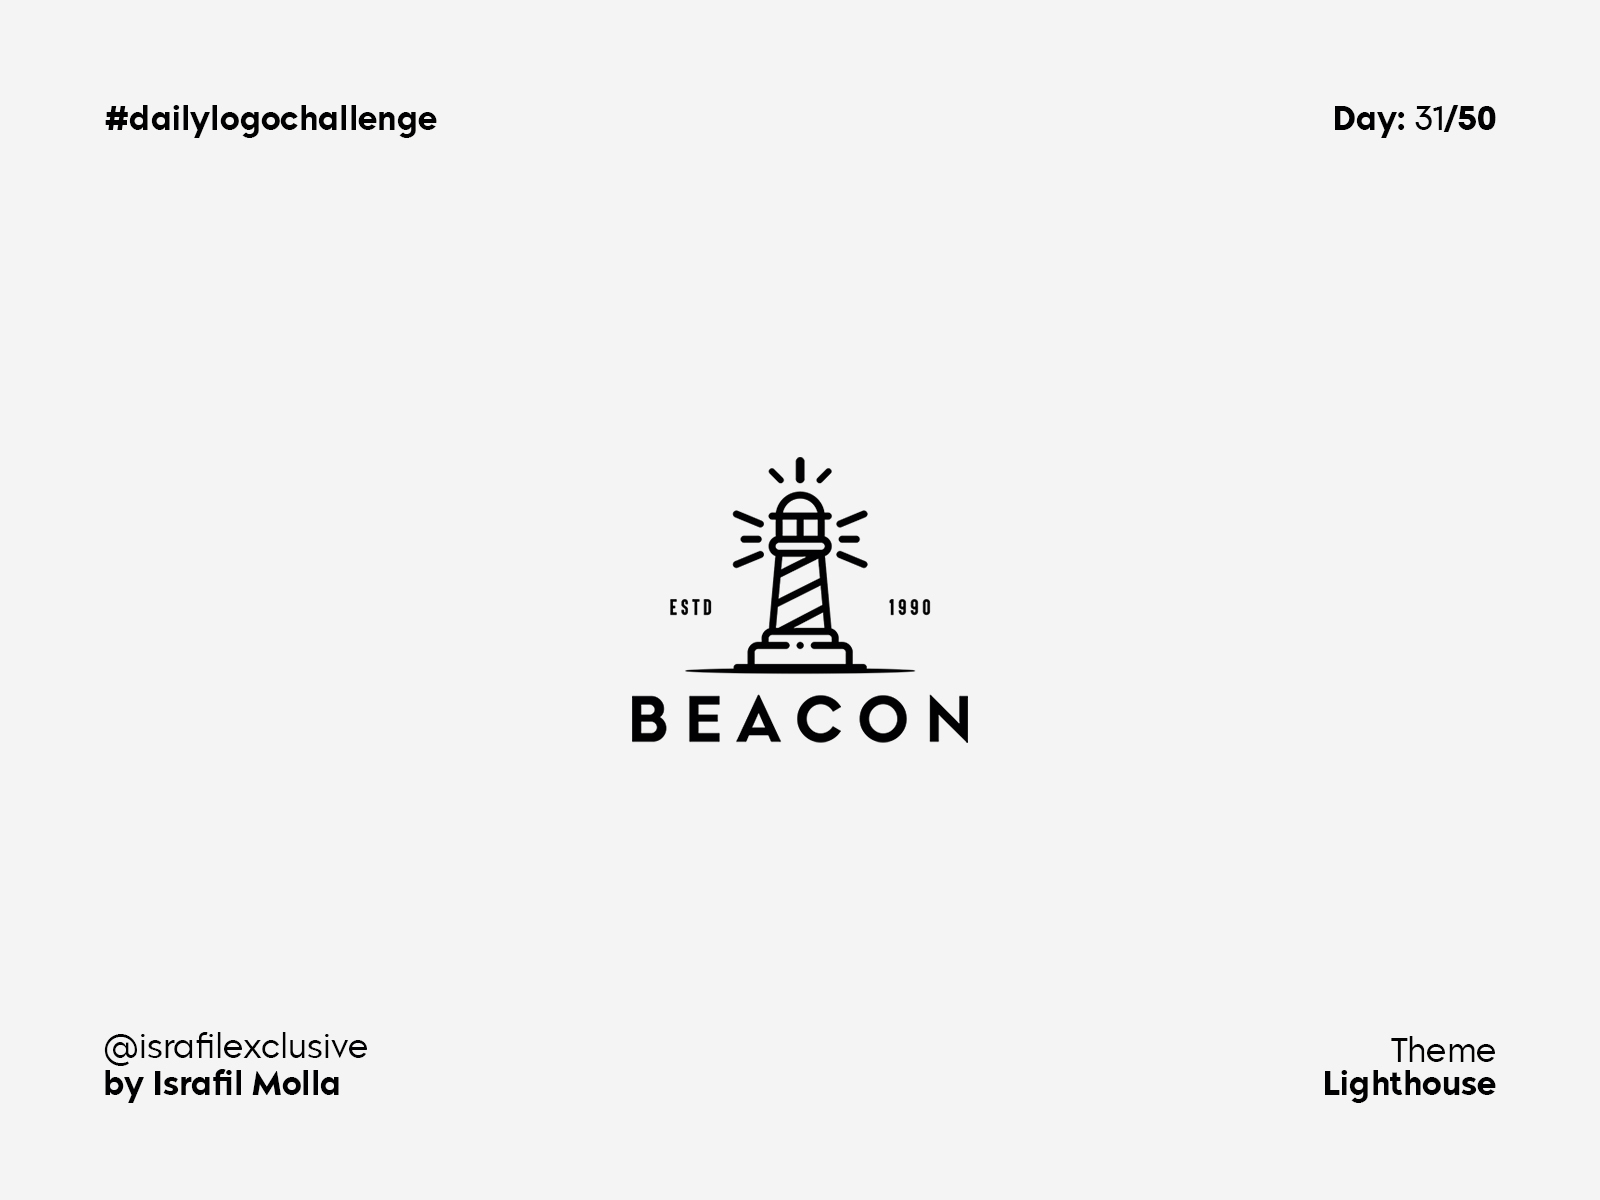 Beacon Daily Logo Challenge Day 31 by Israfil Molla on Dribbble